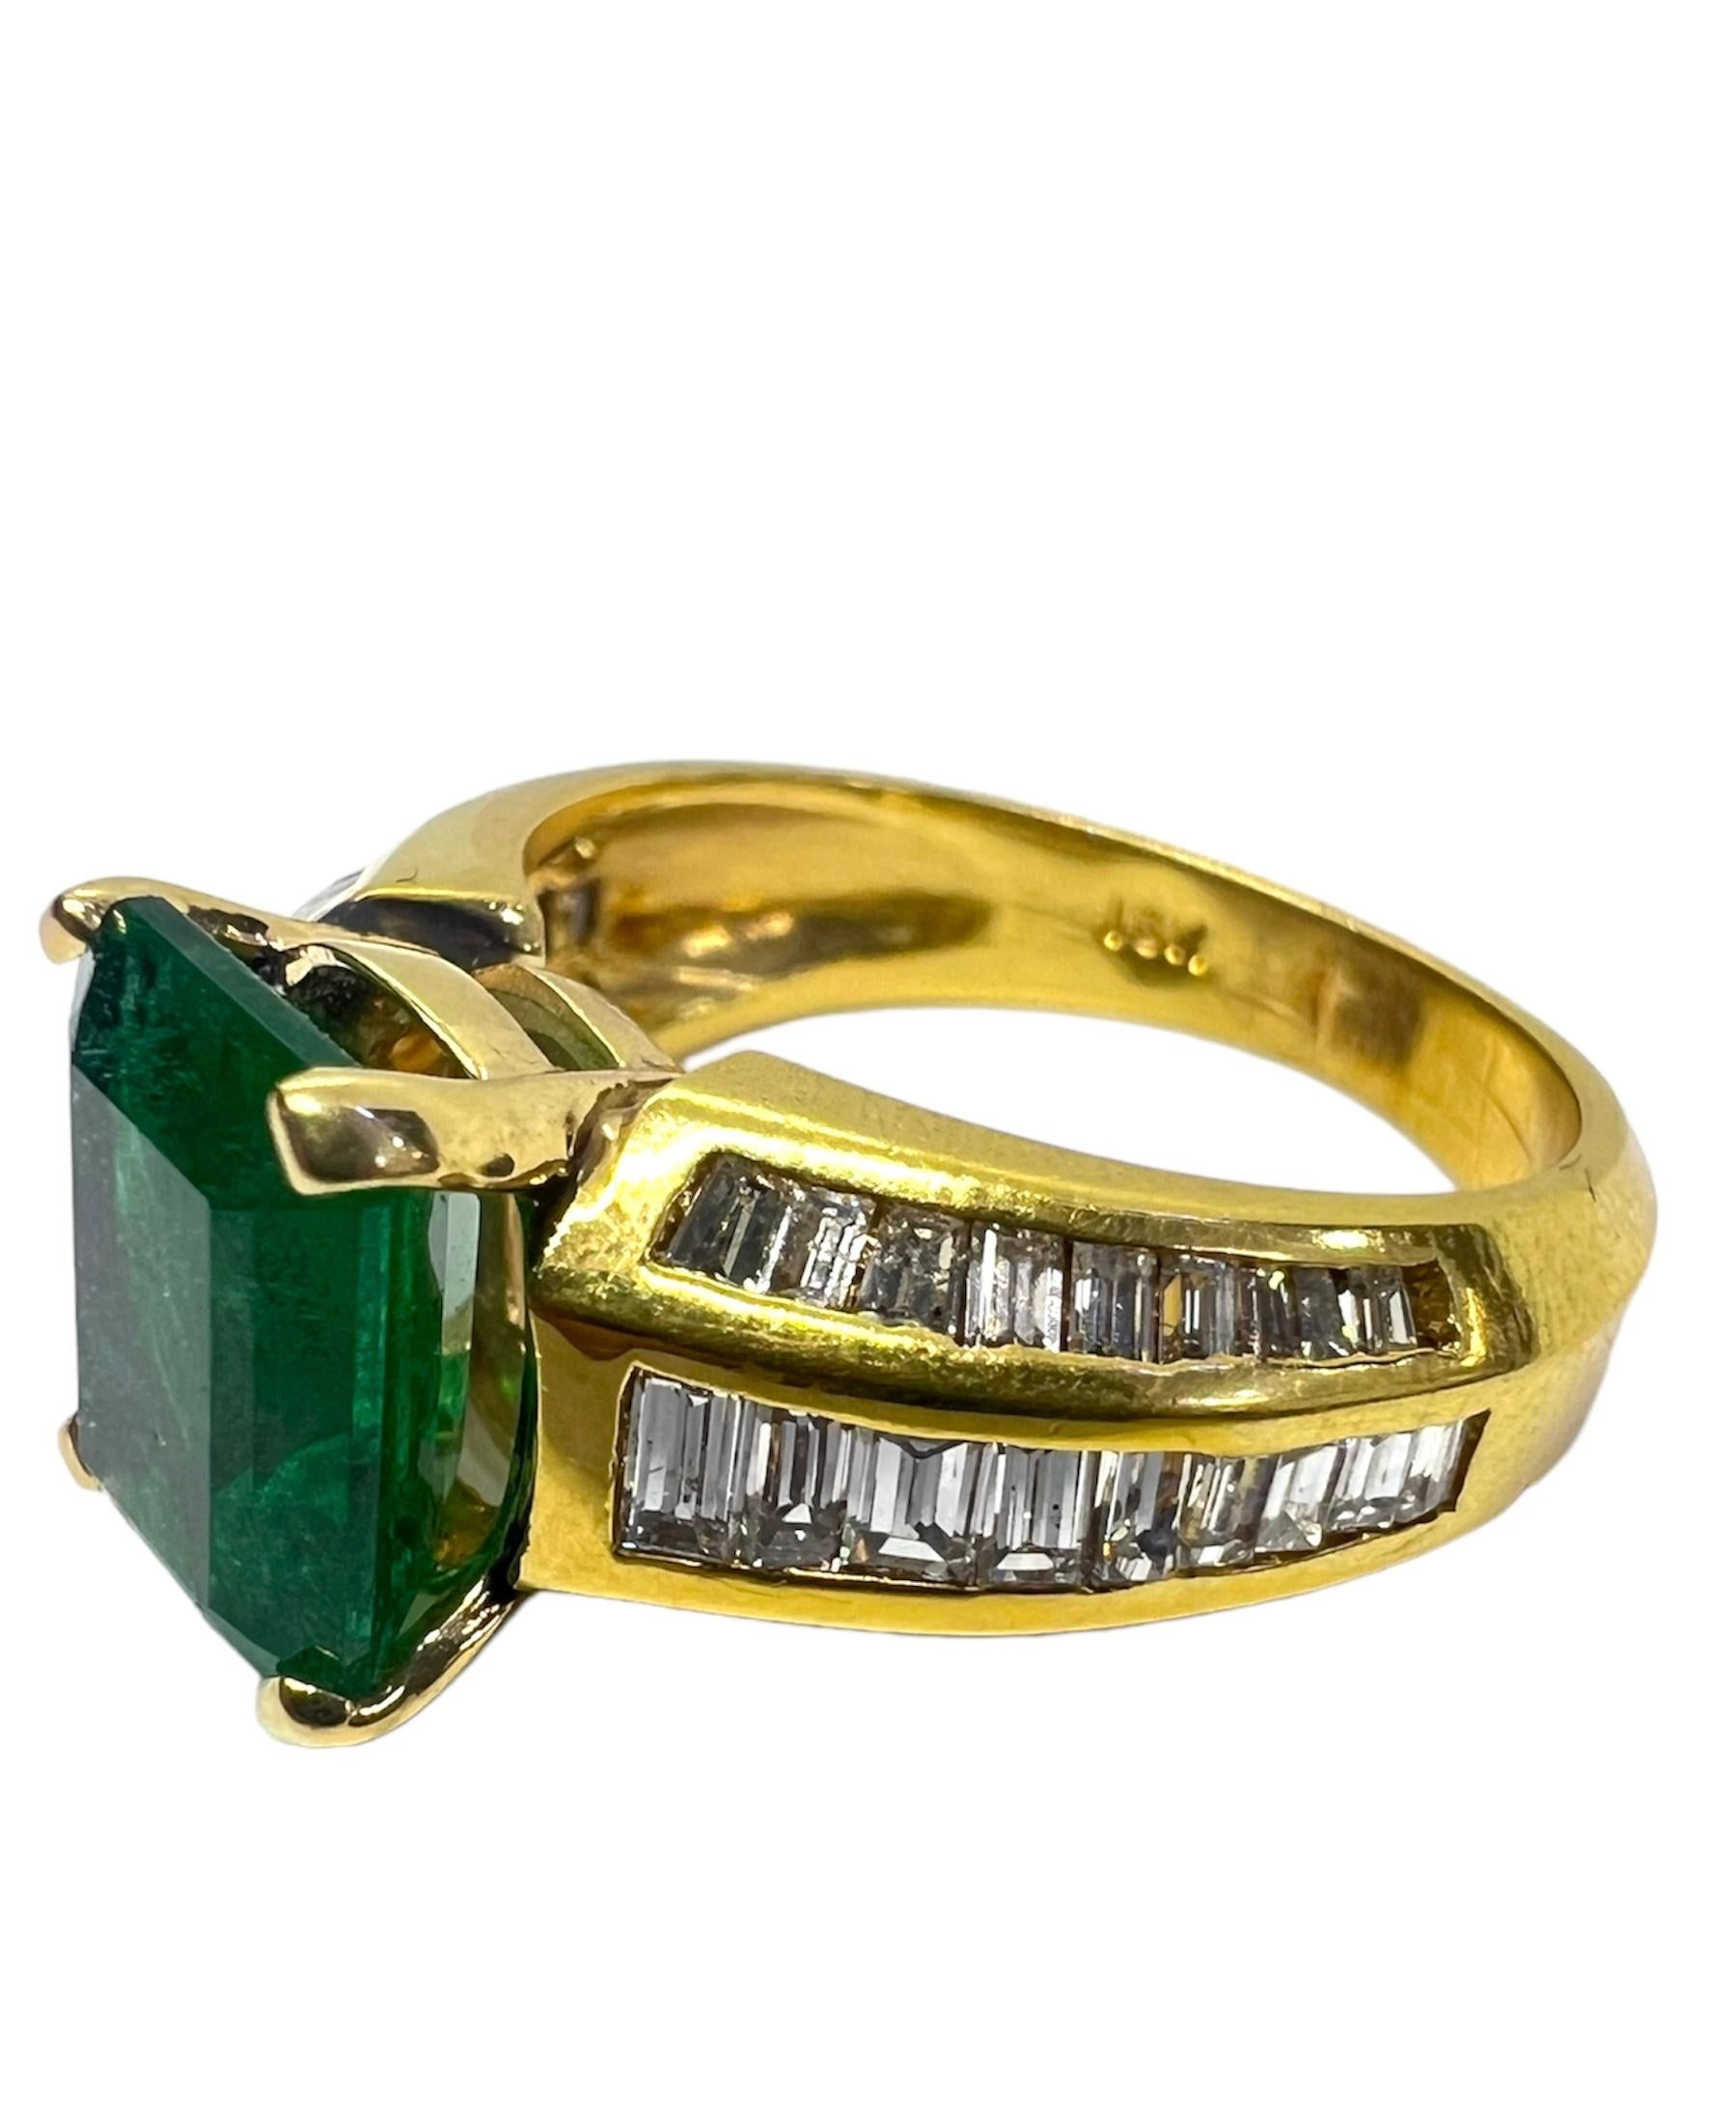 18K yellow gold ring with emerald center stone and diamonds.

Sophia D by Joseph Dardashti LTD has been known worldwide for 35 years and are inspired by classic Art Deco design that merges with modern manufacturing techniques.